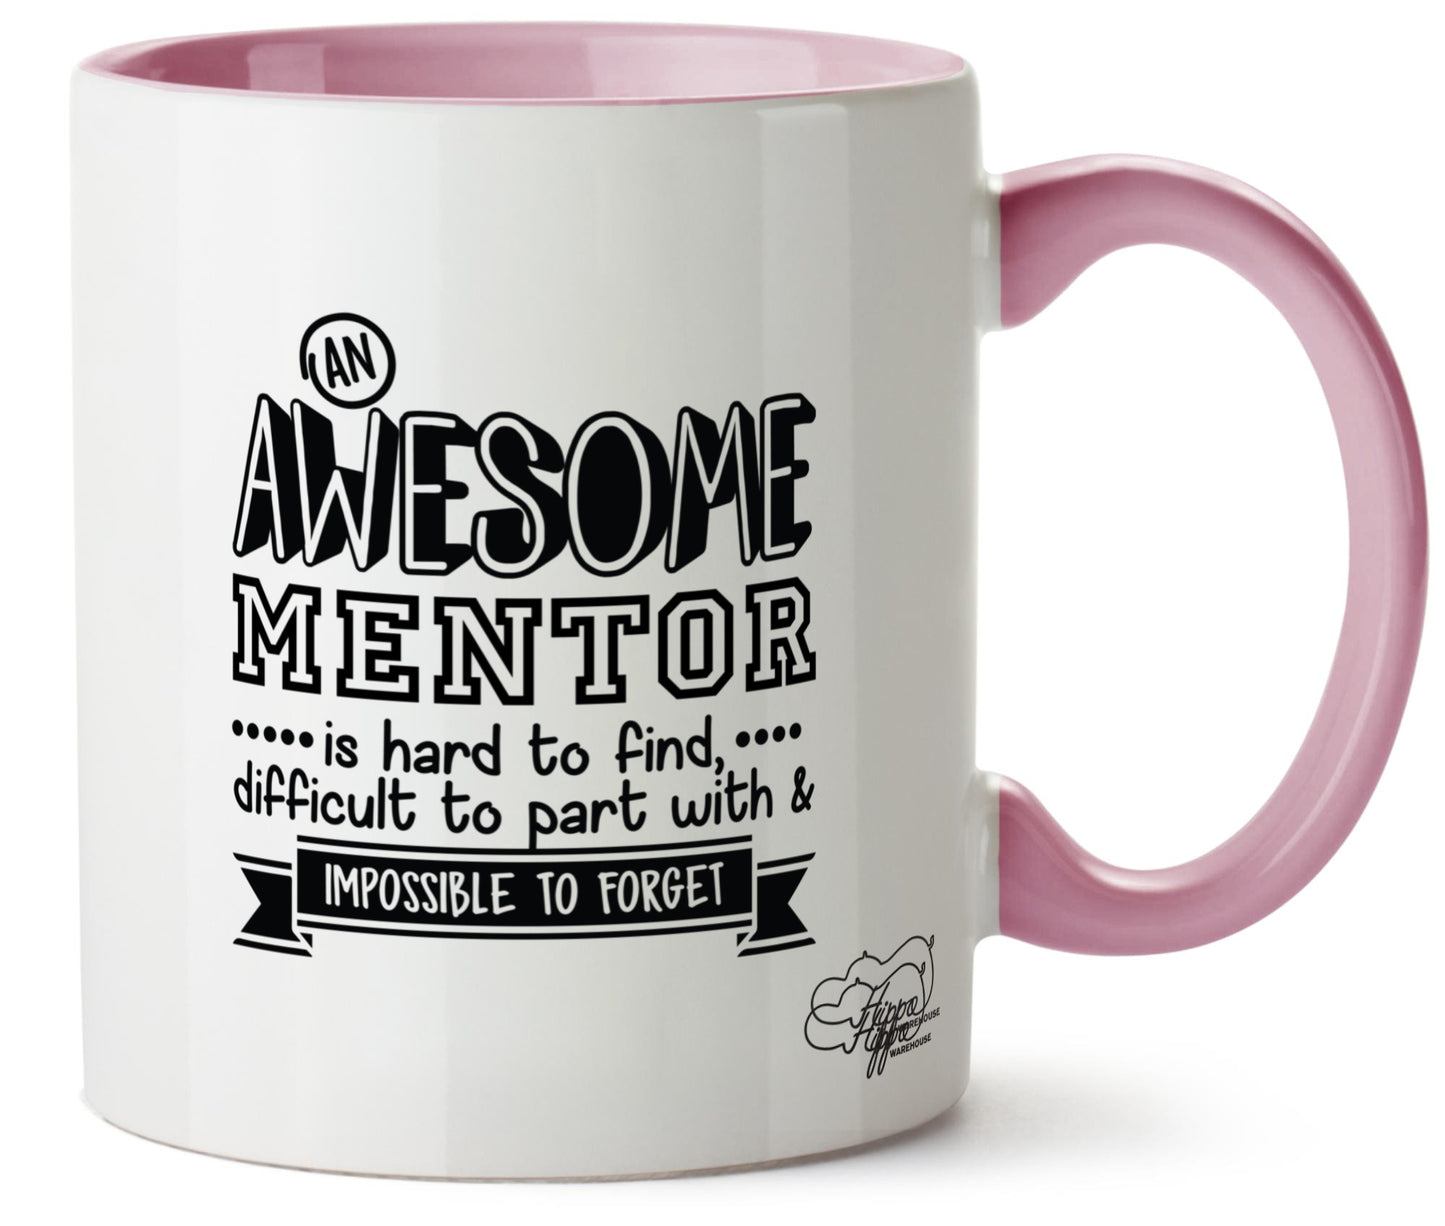 An Awesome Mentor is Hard to Find, Difficult to Part With & Impossible to Forget Printed 11oz Mug